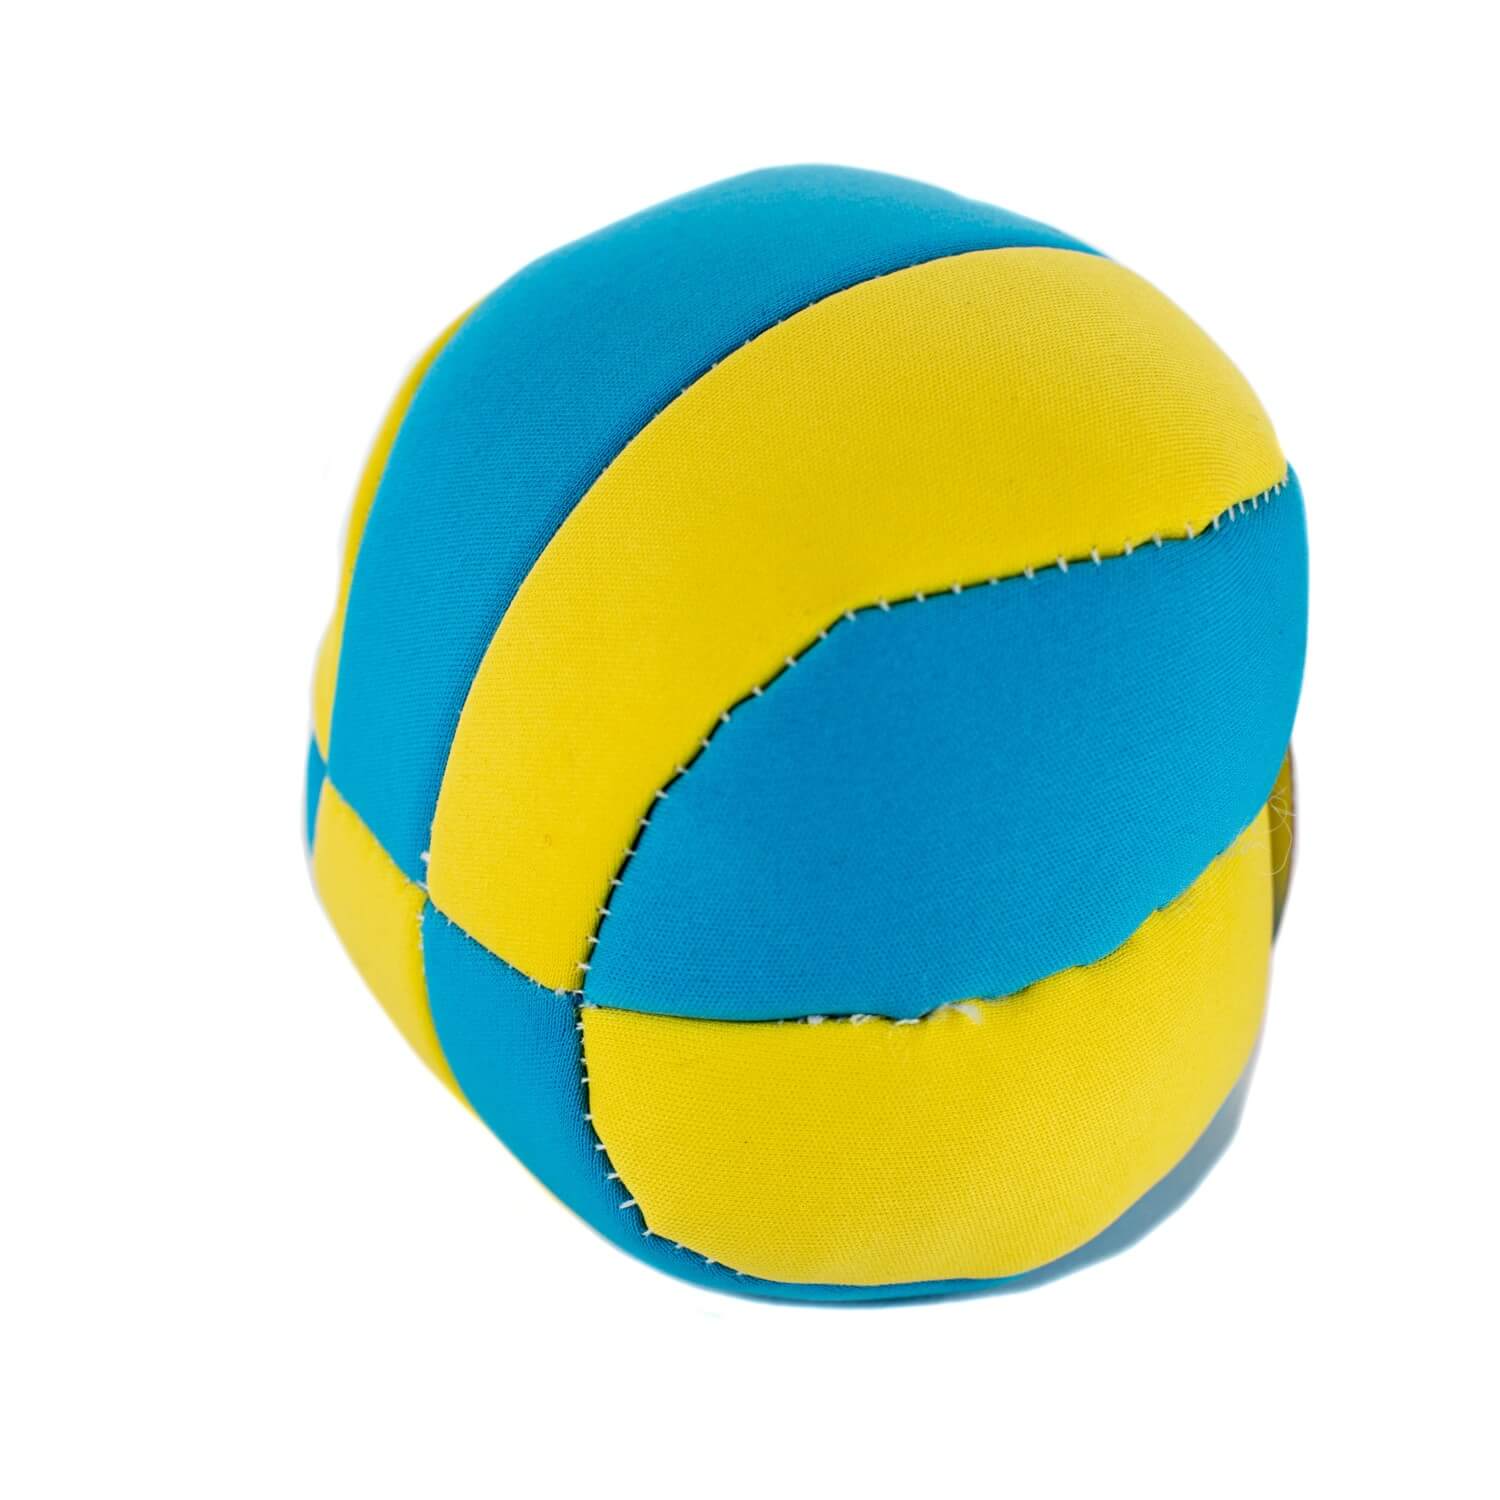 A blue and yellow Floating Water Ball with Squeaker on a white background.